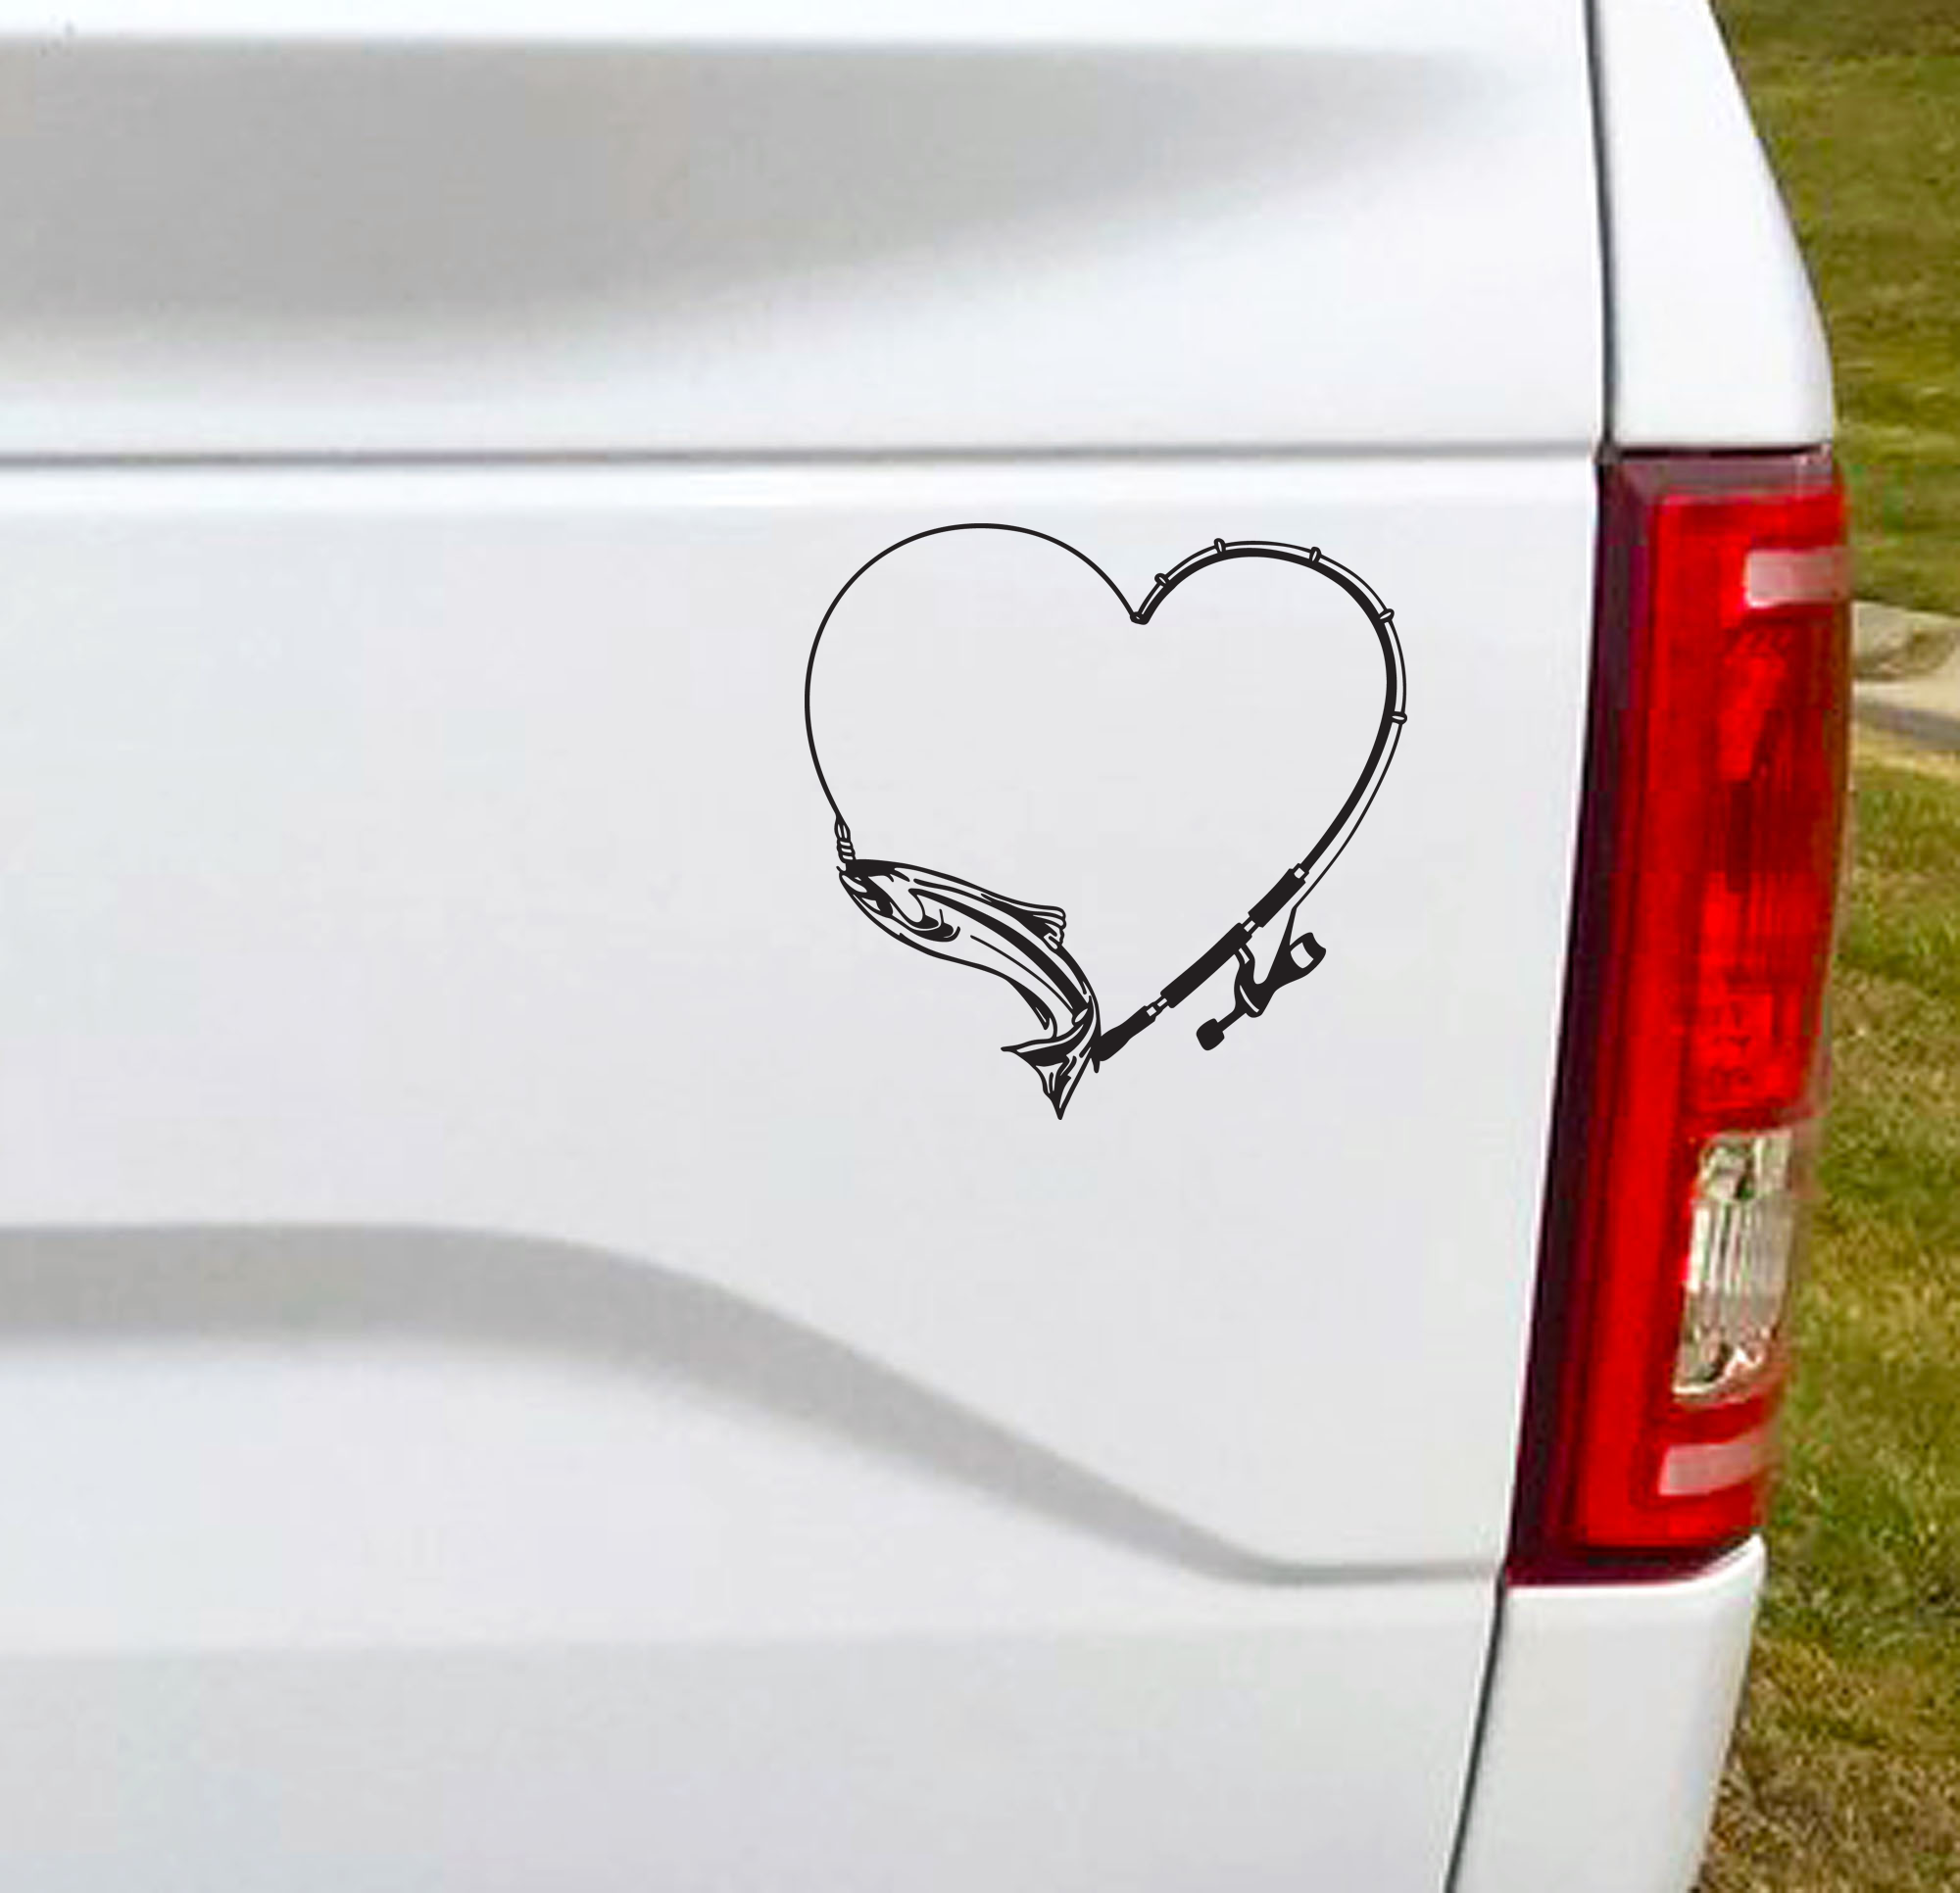 Fishing Love vinyl car decal bumper sticker. Nothing more relaxing and enjoyable than spending the day fishing.  5"W x 5"H Funny Car Decal, Car Sticker, Car Vinyl, Bumper Sticker, Vinyl Stickers, Vinyl Sticker. Black